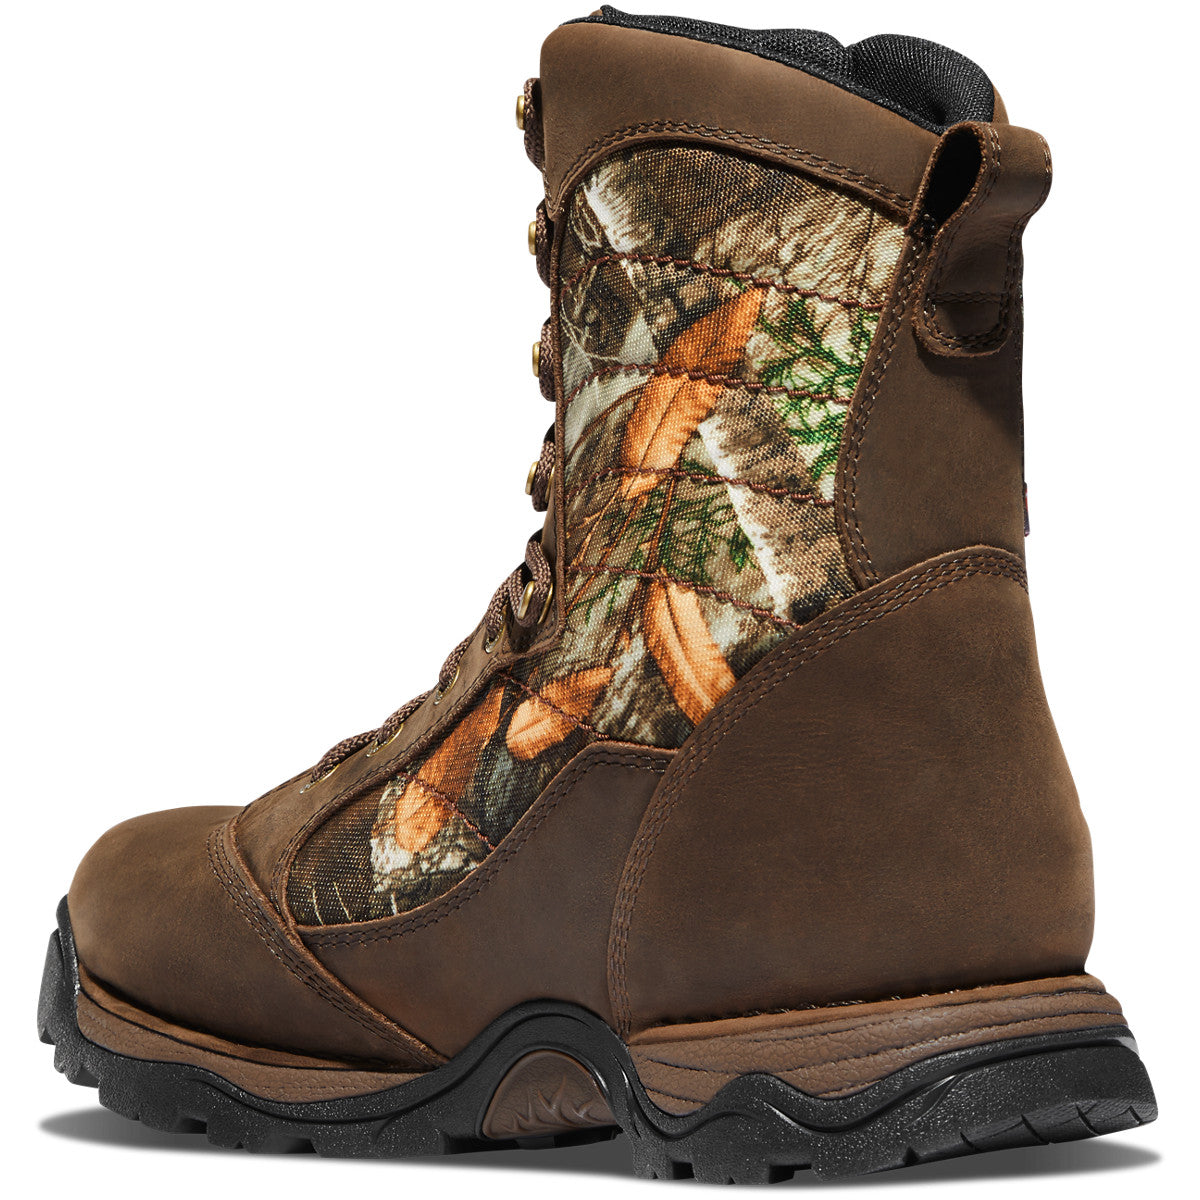 Danner Pronghorn 8" Realtree Edge 400G Insulated Gore-Tex Style 41341